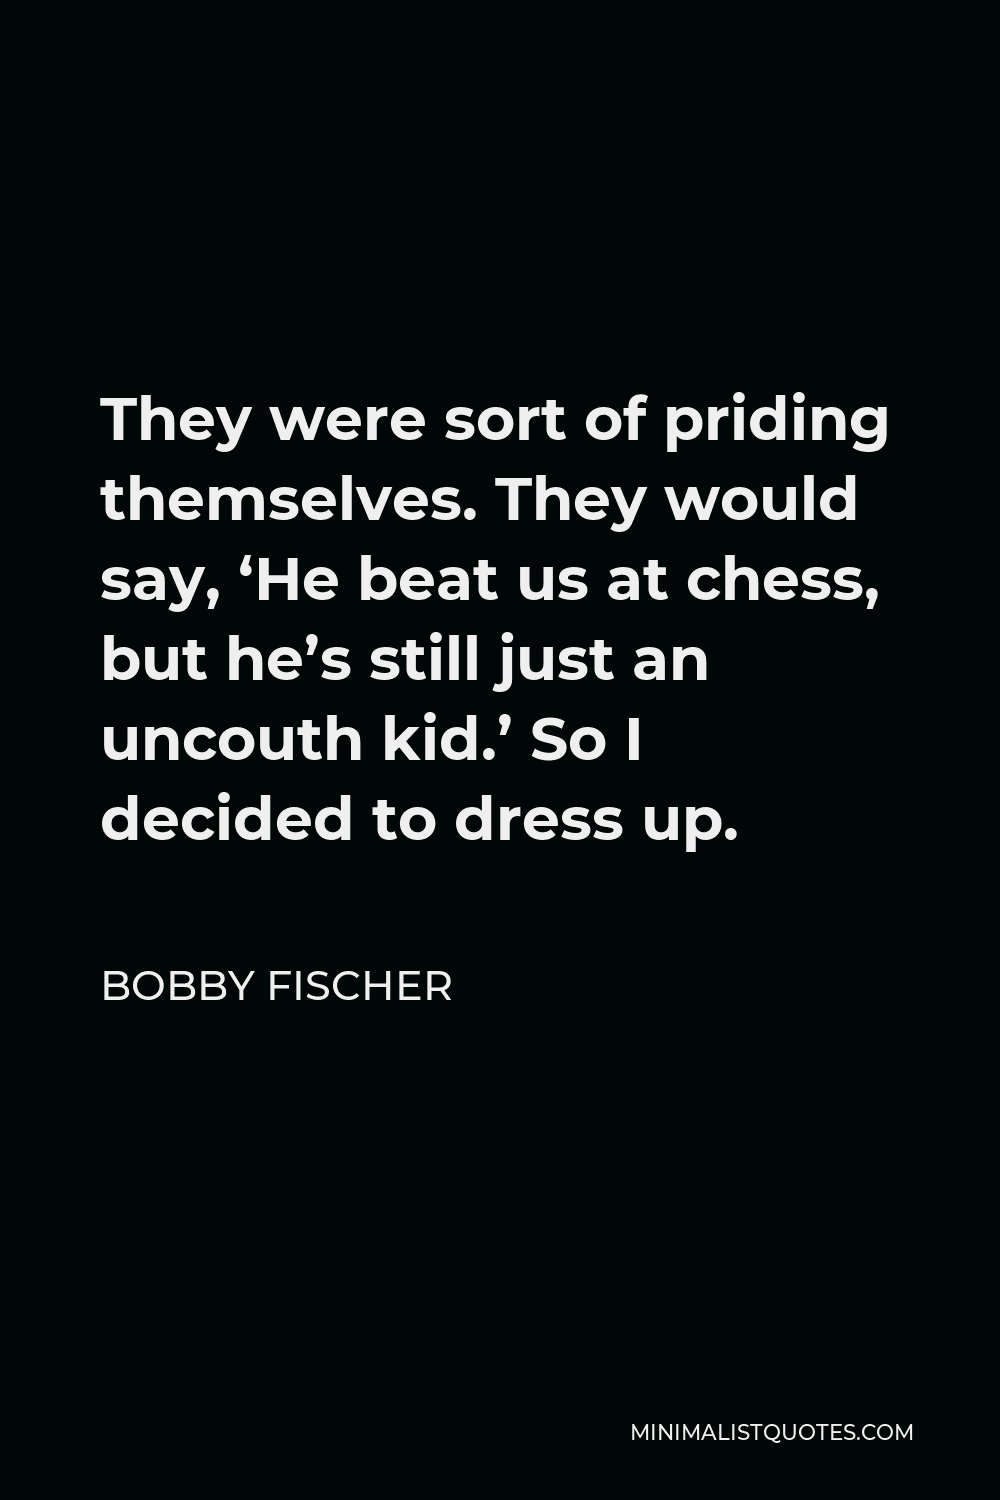 Bobby Fischer Quote - They were sort of priding themselves. They would say, ‘He beat us at chess, but he’s still just an uncouth kid.’ So I decided to dress up.